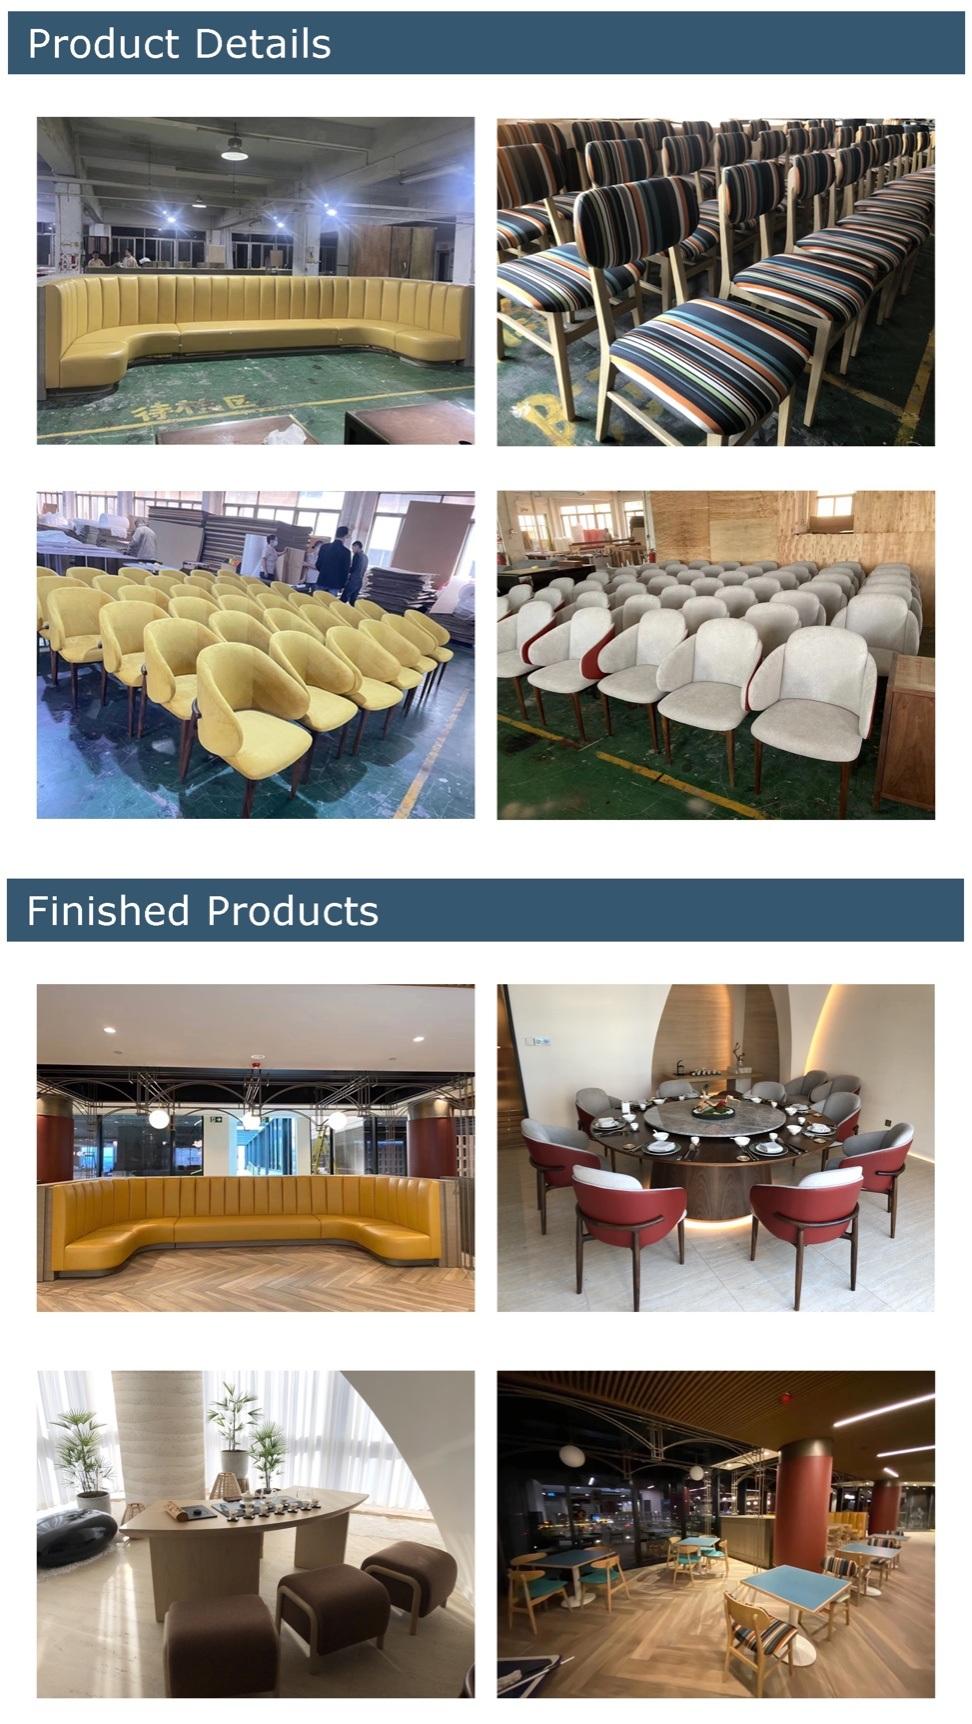 Foshan Manufacture Furniture for Hospitality Industry Hotel Restaurant Furniture